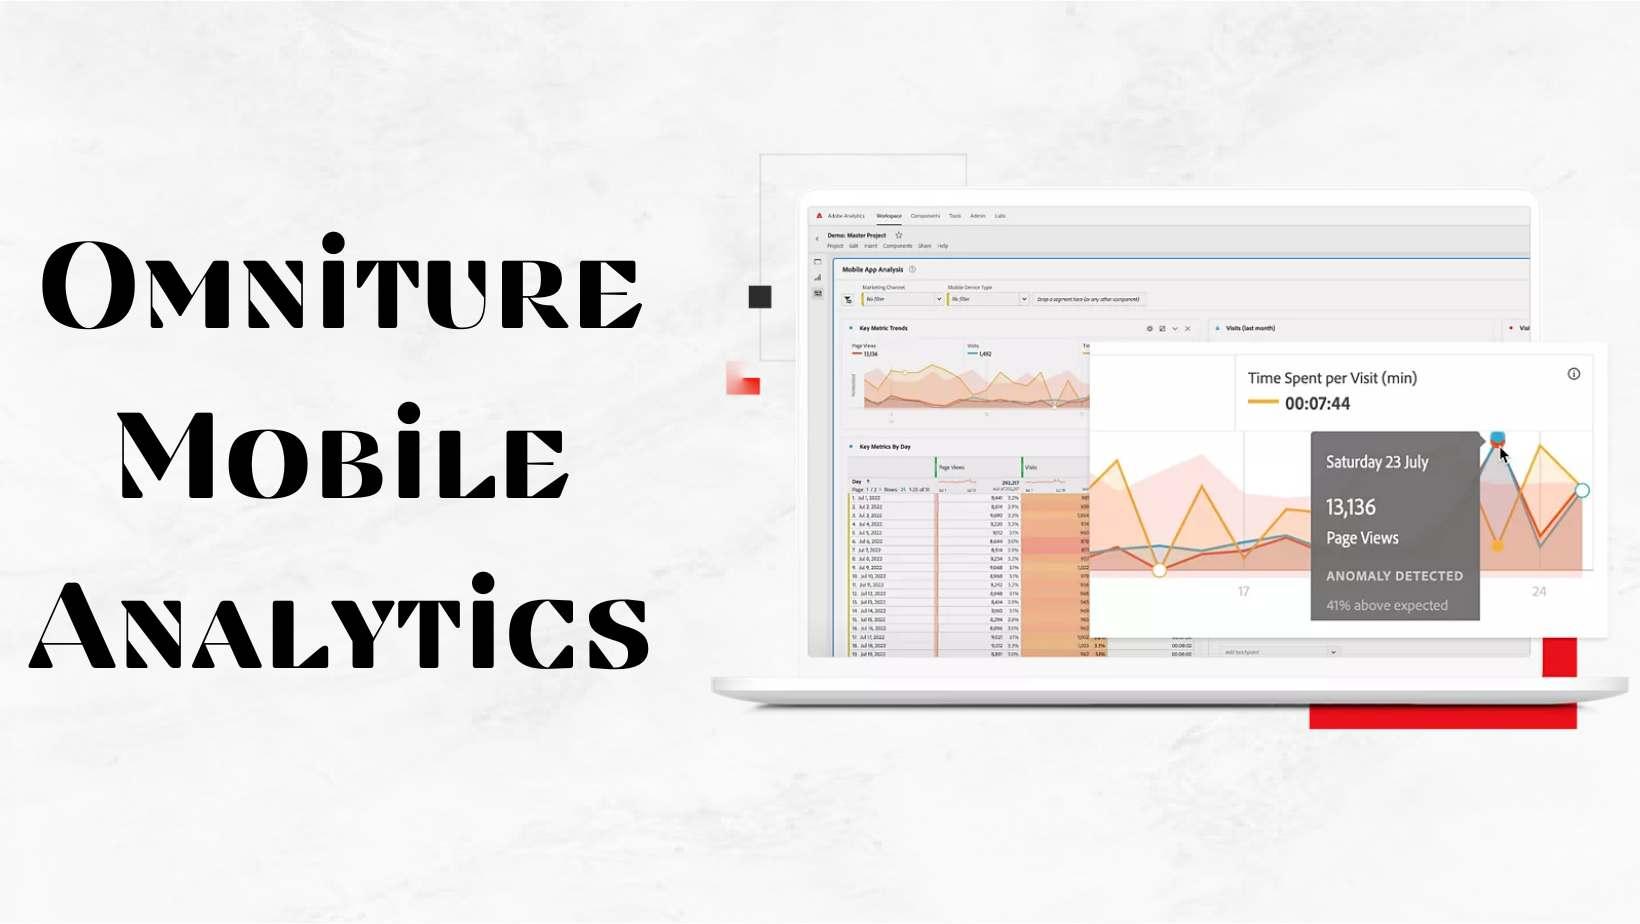 Main features of omniture mobile analytics